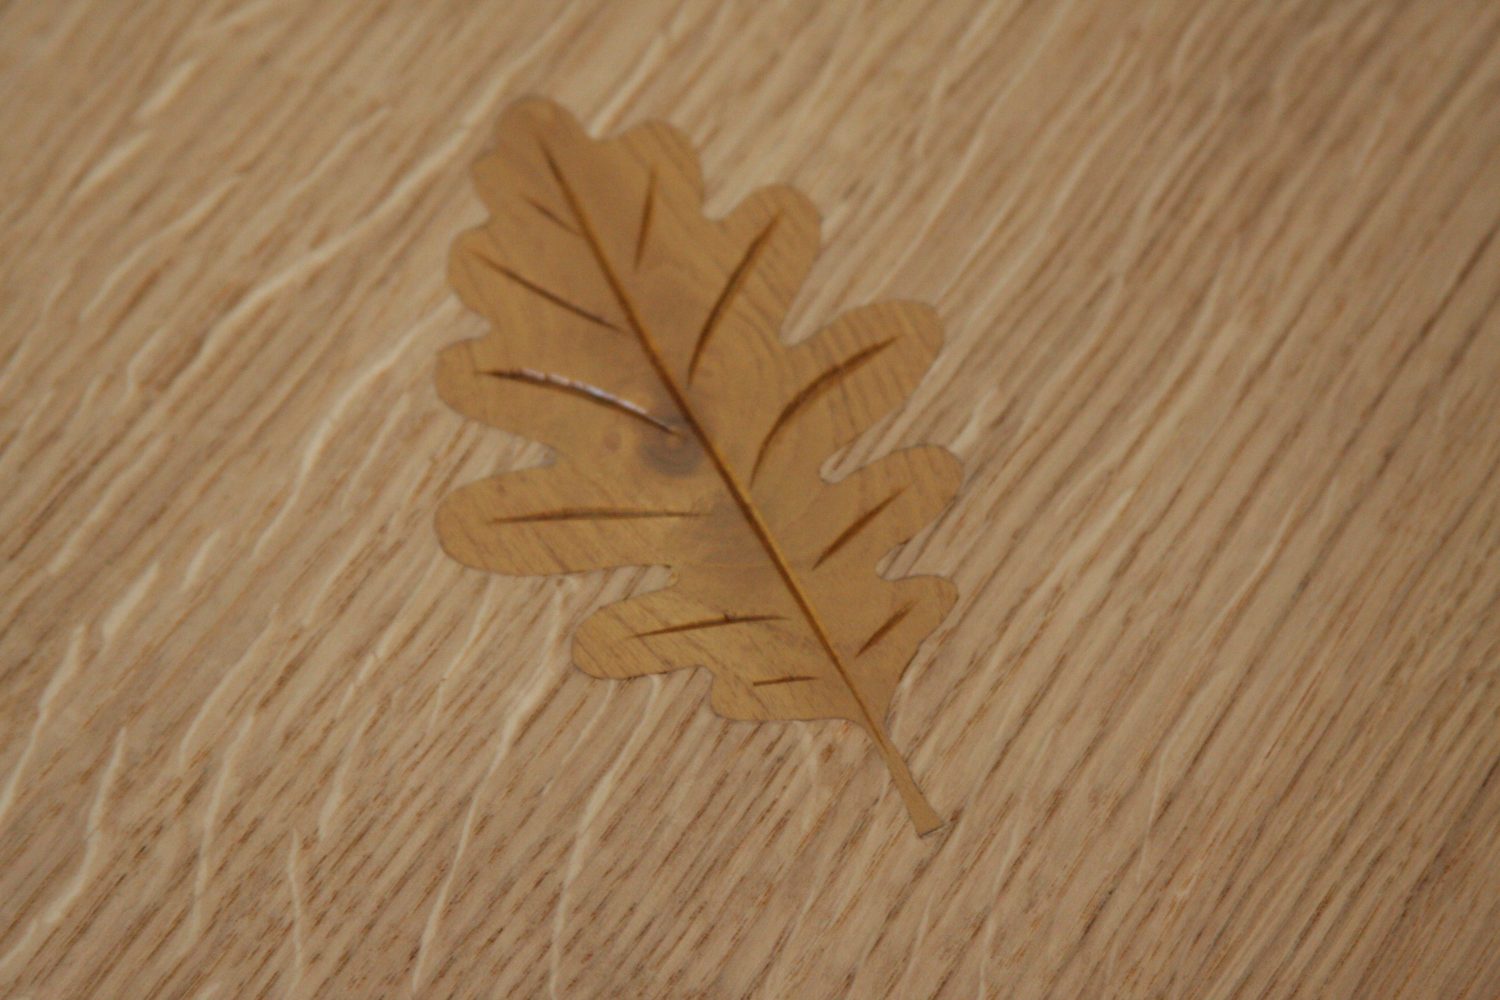 Other type of leaf detail